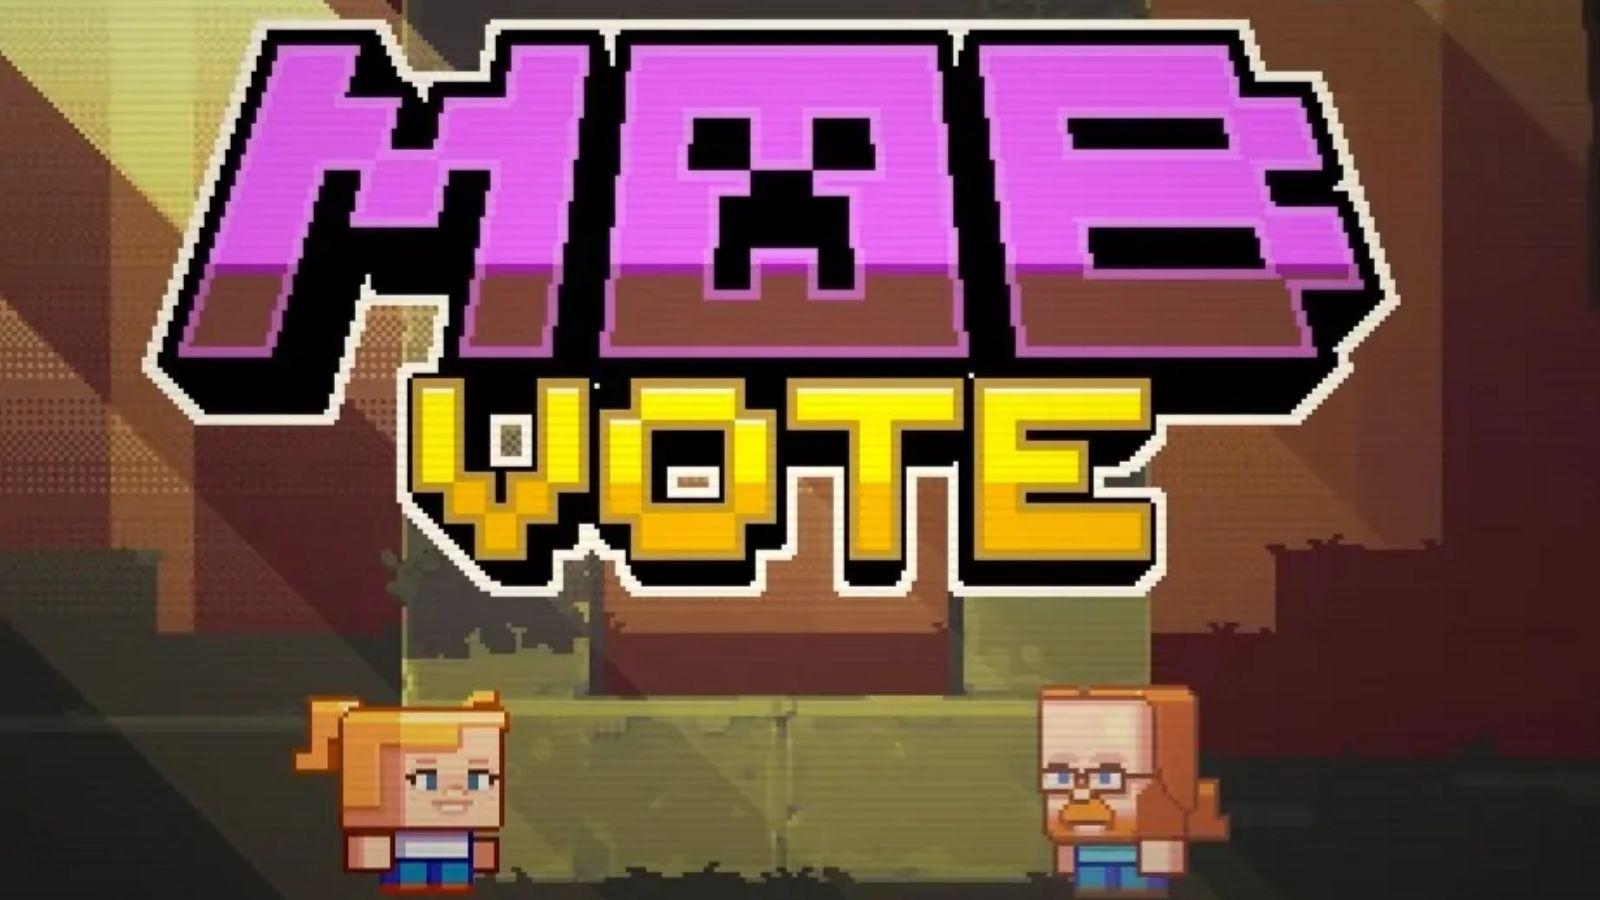 Minecraft Mob Vote2021 All the Information you need to know